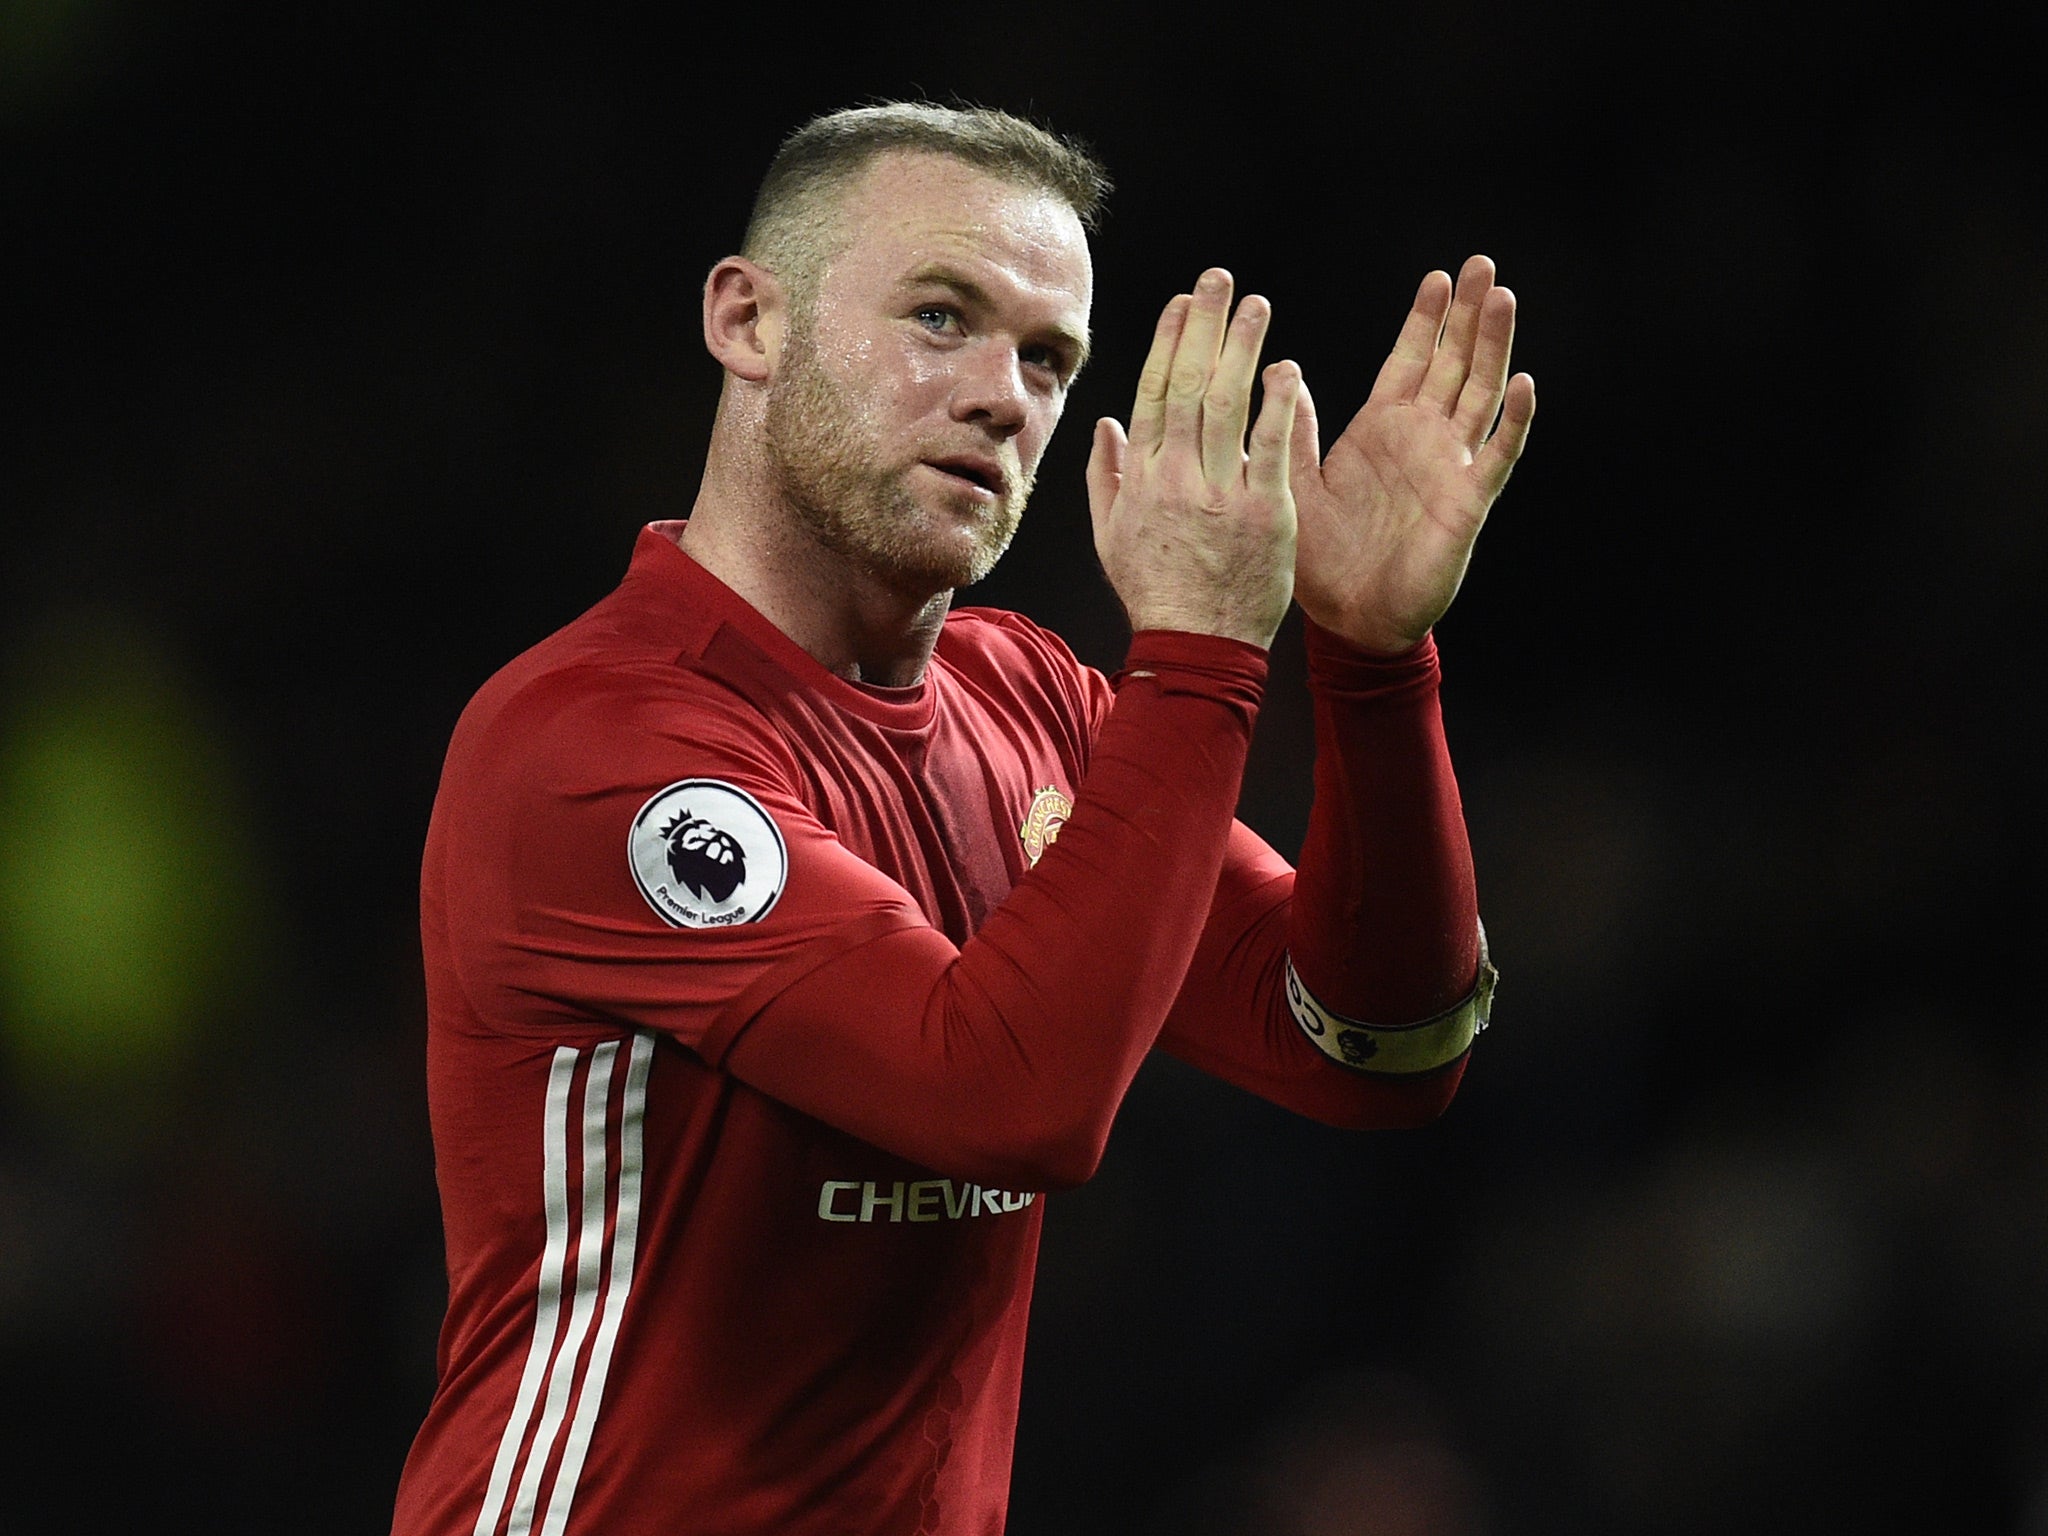 Wayne Rooney appeared as a half-time substitute in Manchester United's midweek draw with Hull